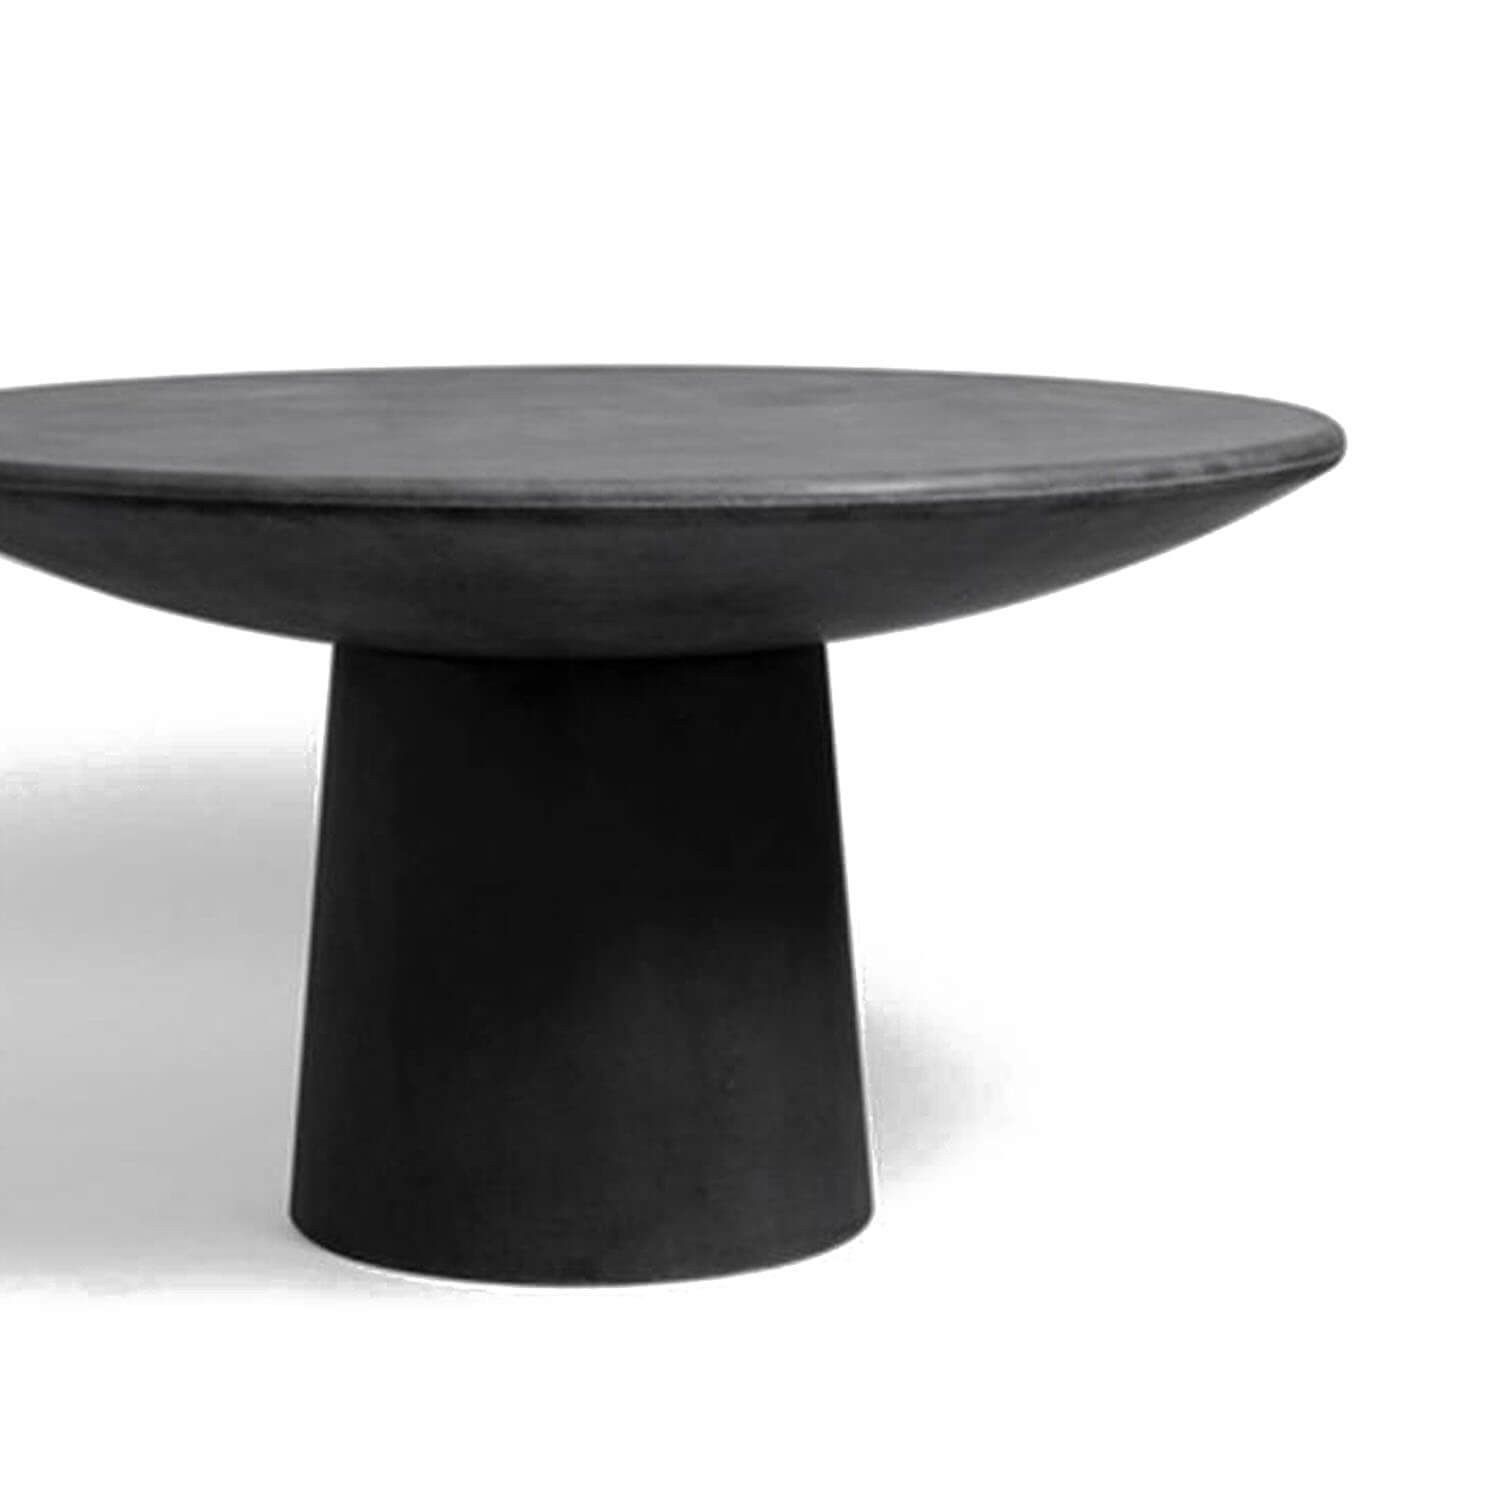 Roly Poly Dining Table | Kooku With Regard To Best And Newest Faye Dining Tables (View 17 of 25)